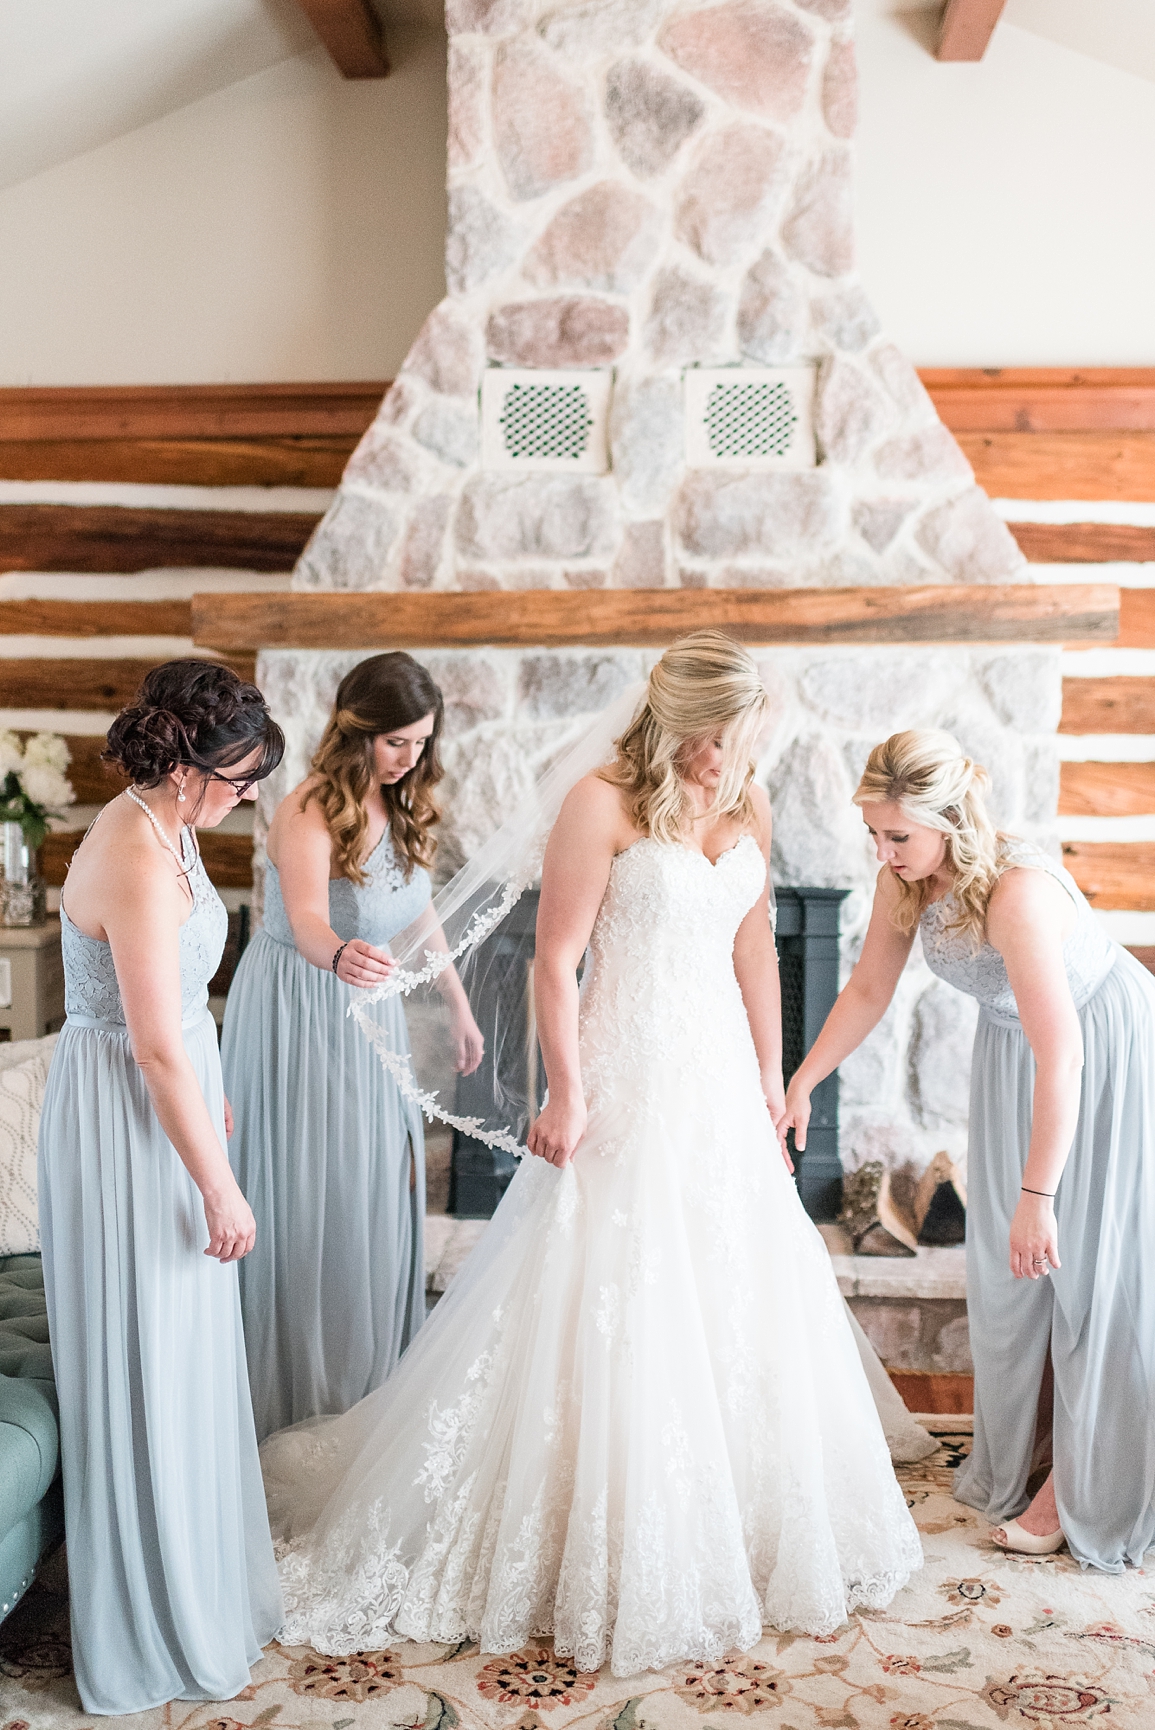 Bride getting into dress with bridesmaids